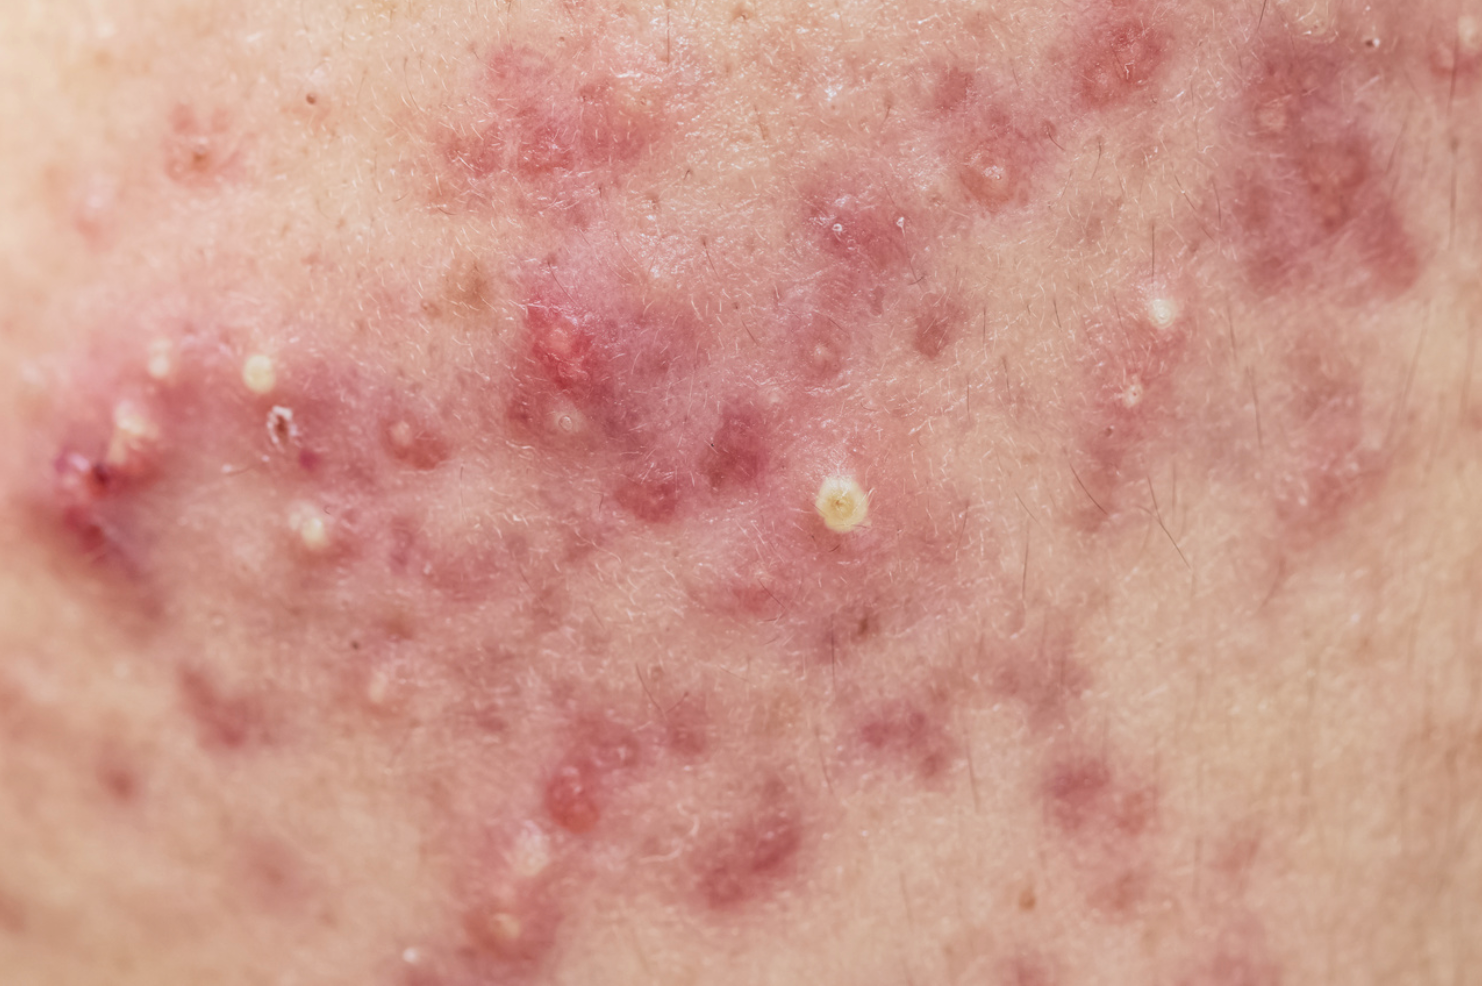 Study: Dupilumab Significantly Improves Itch, Hives in Patients With Chronic Spontaneous Urticaria